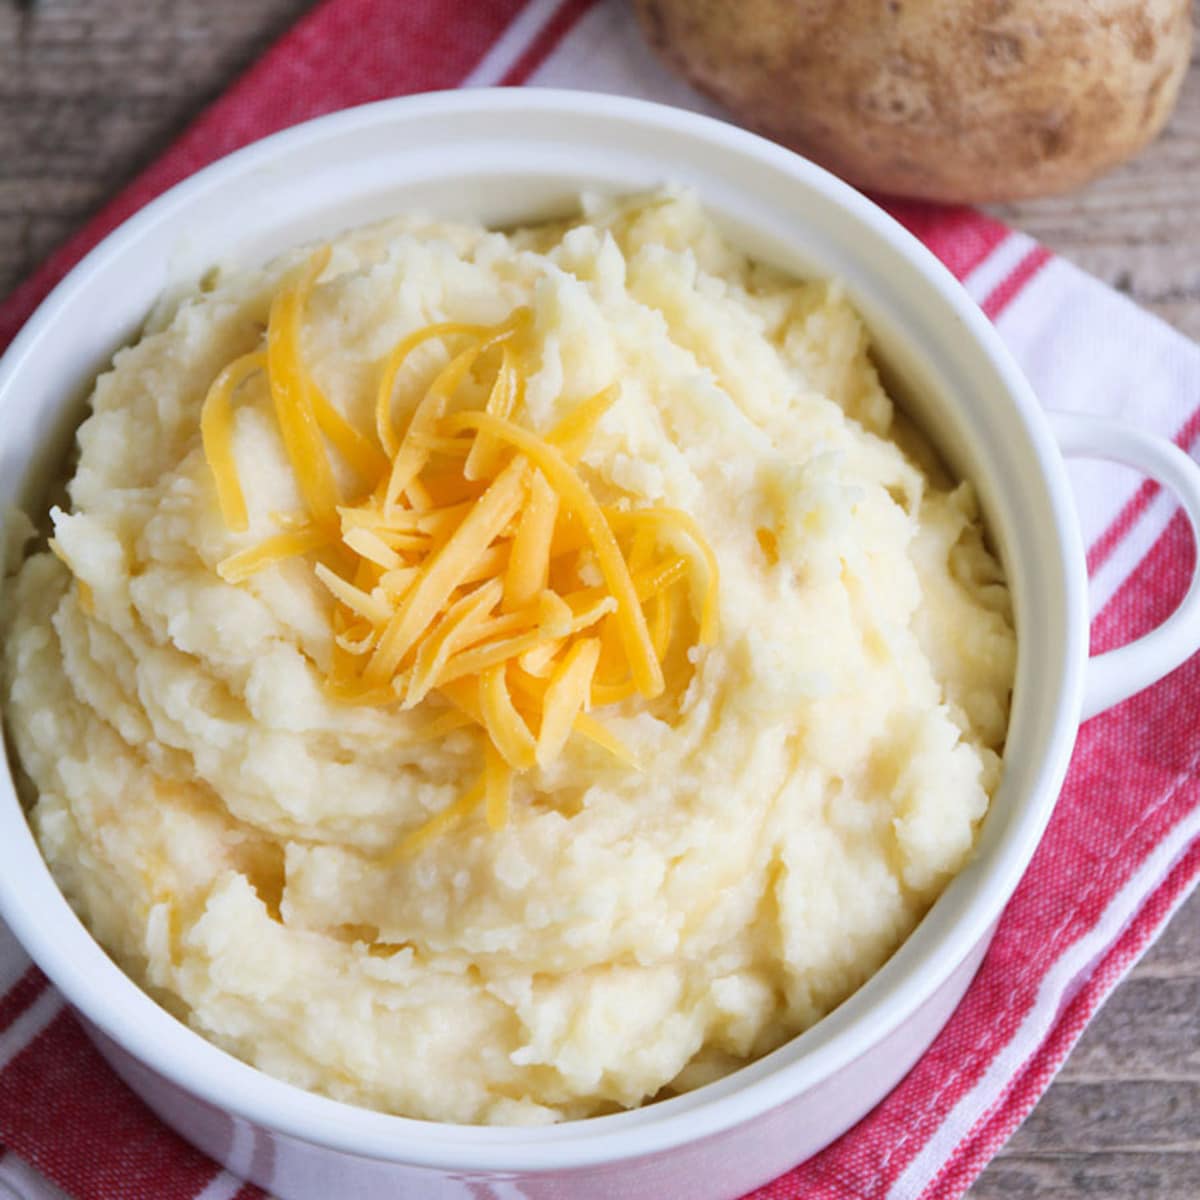 Crockpot side dishes - slow cooker mashed potatoes topped with cheddar cheese.